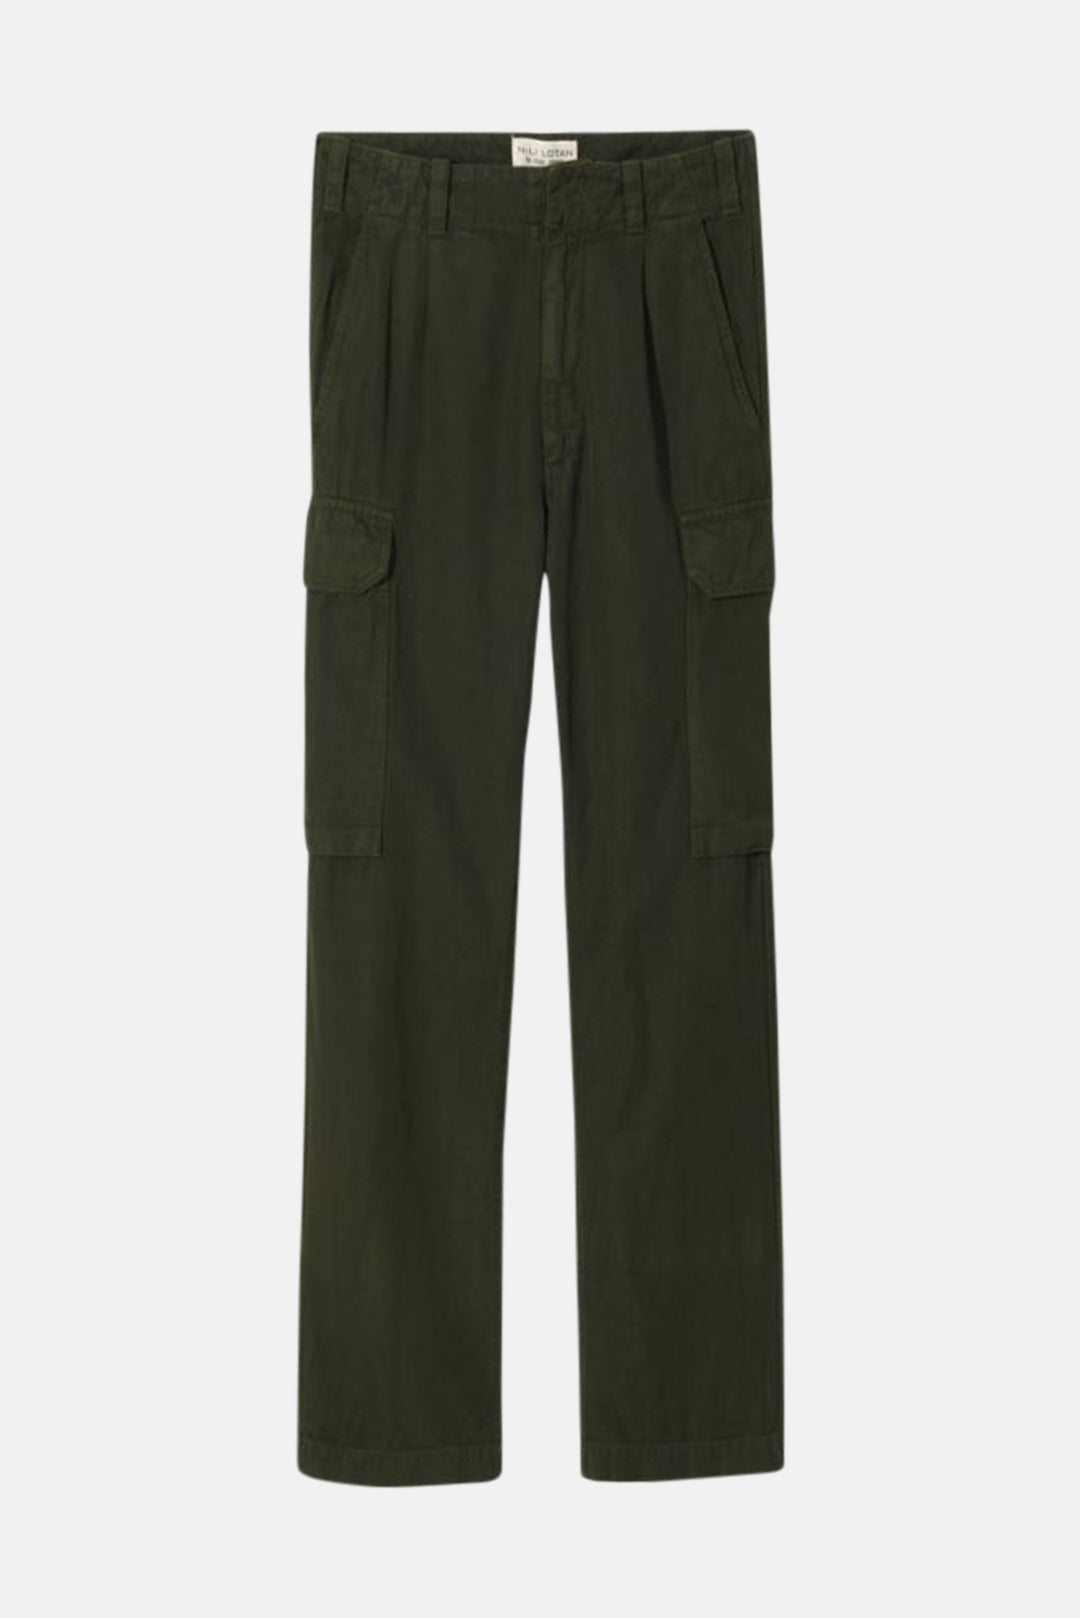 Yannic Cargo Pant Olive Green